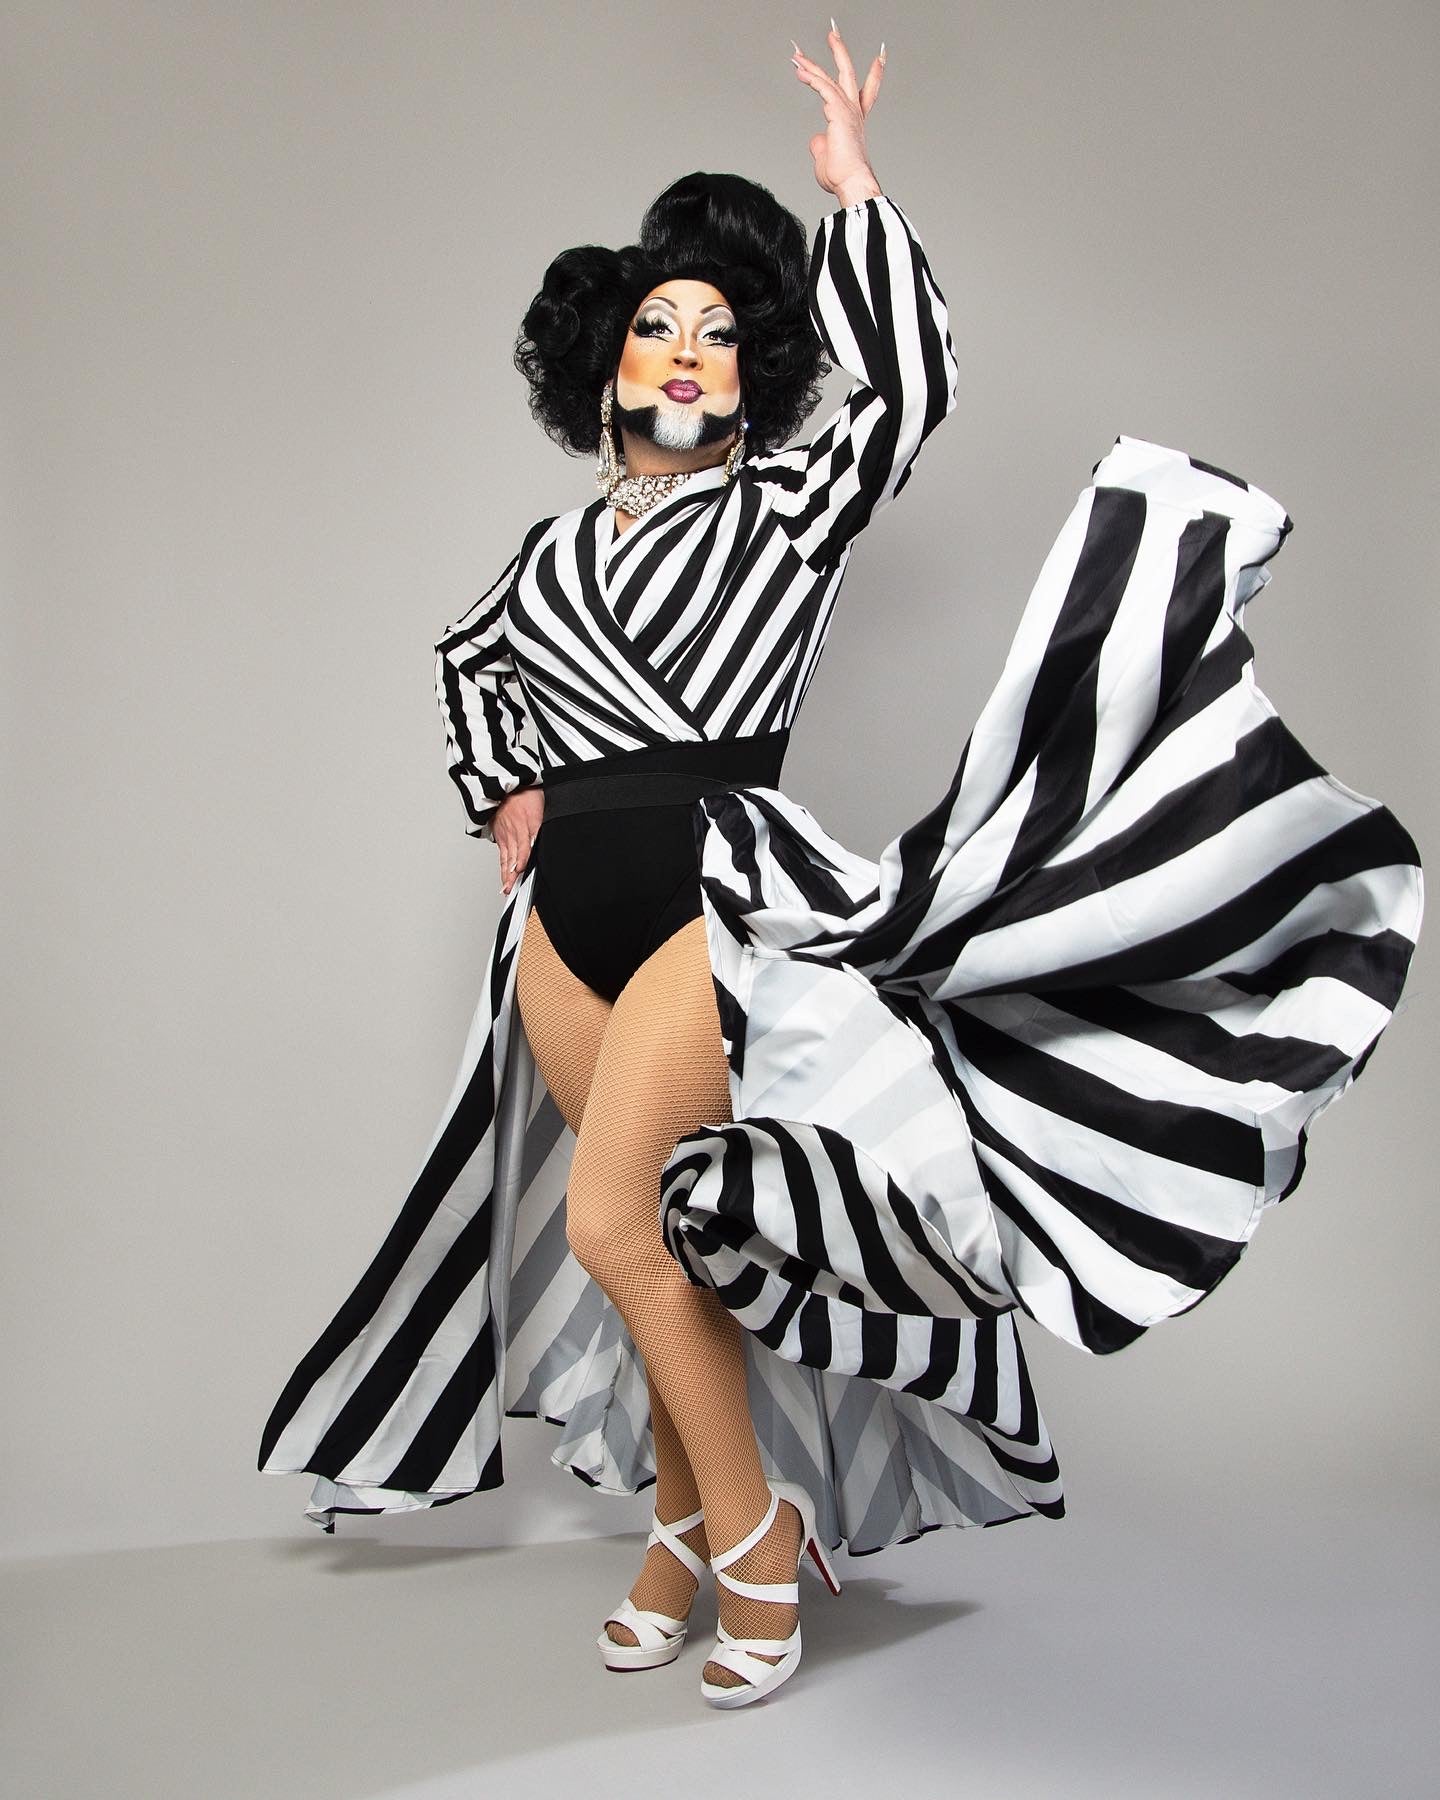 Book a Drag Queen in Columbus, OH